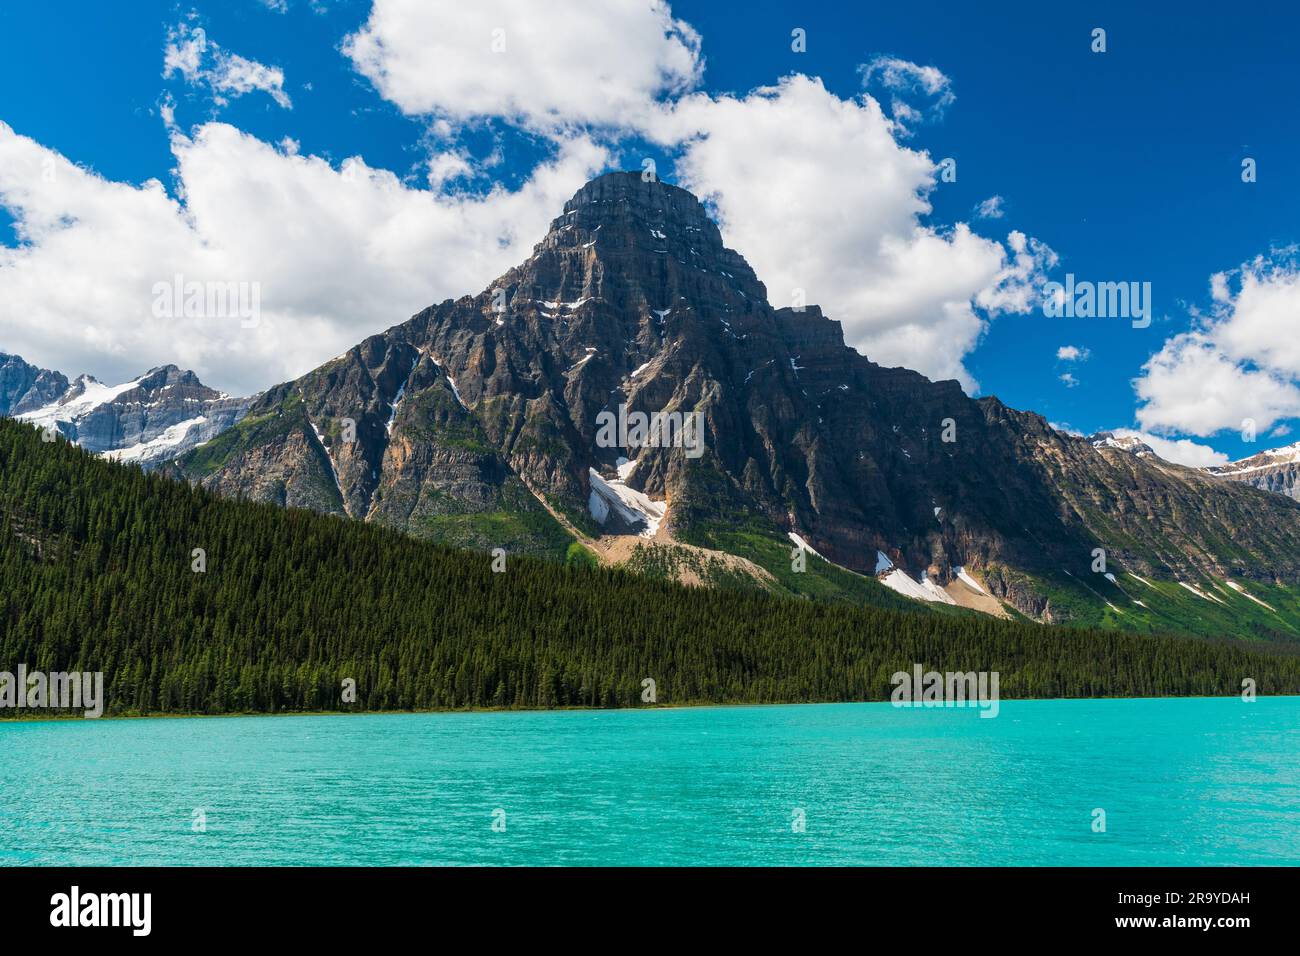 Stunning colored lake and beautiful mountains, Icefields Parkway, Canada Stock Photo